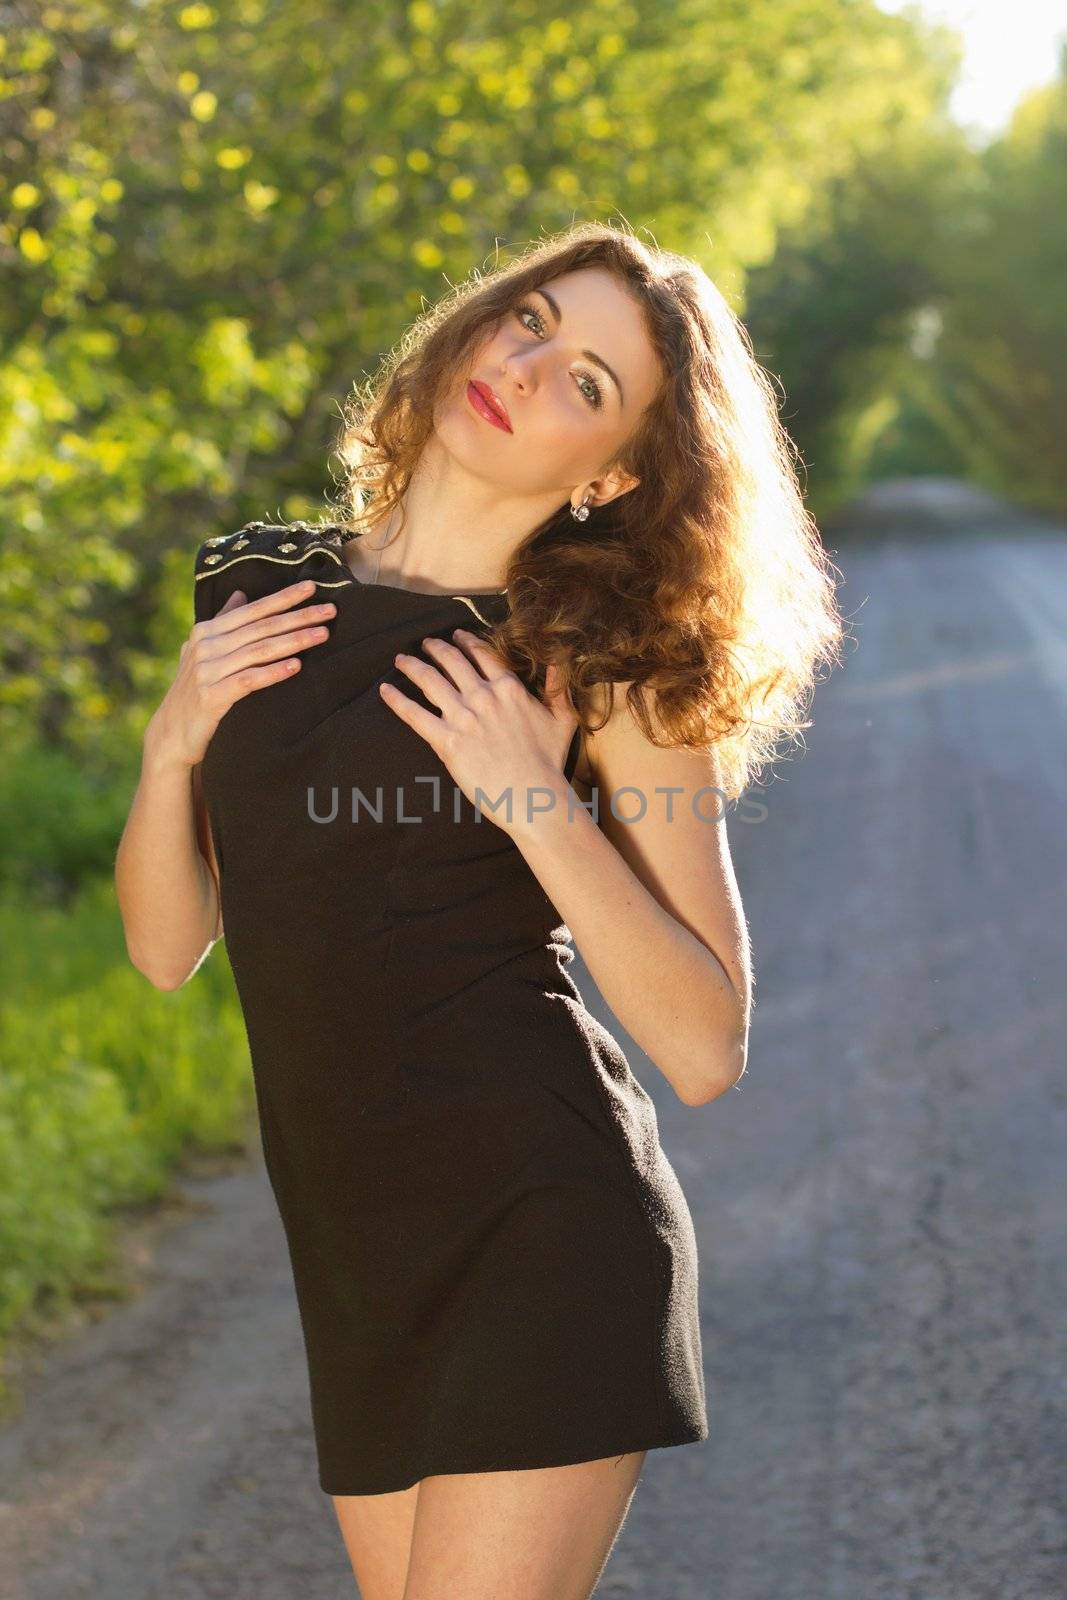 Portrait of a nice young woman in black dress